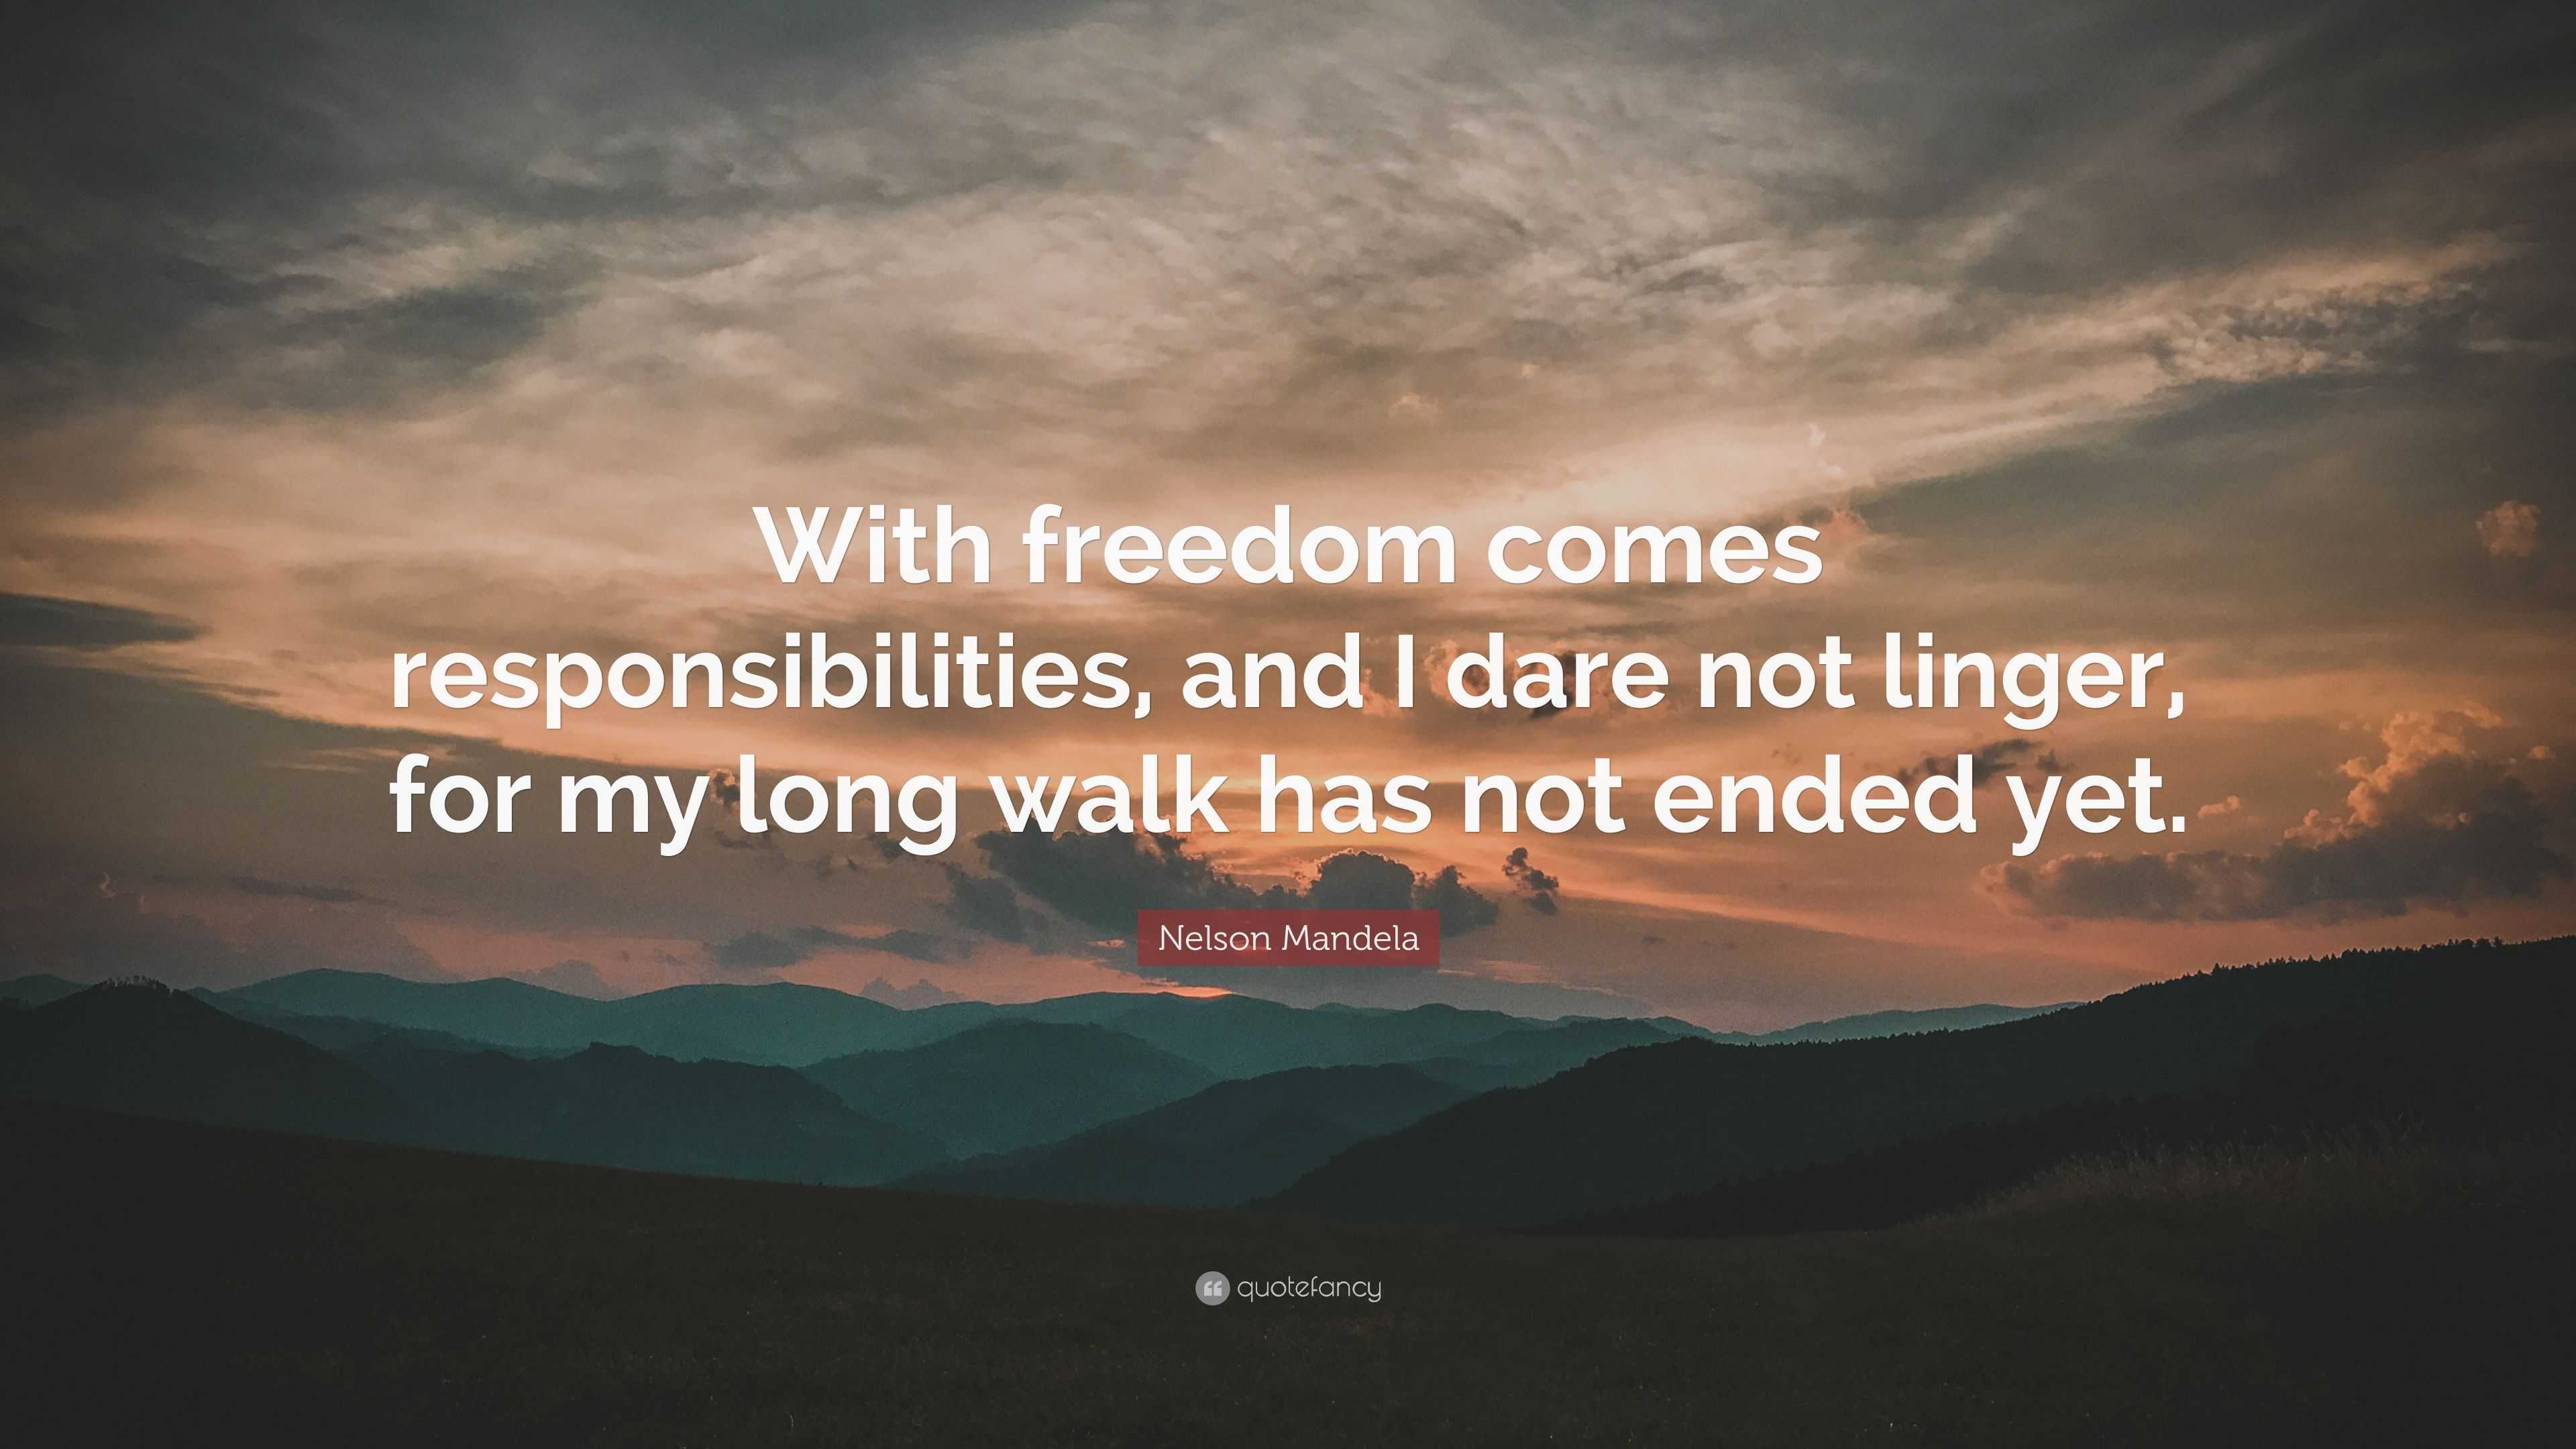 Nelson Mandela Quote “With freedom comes responsibilities